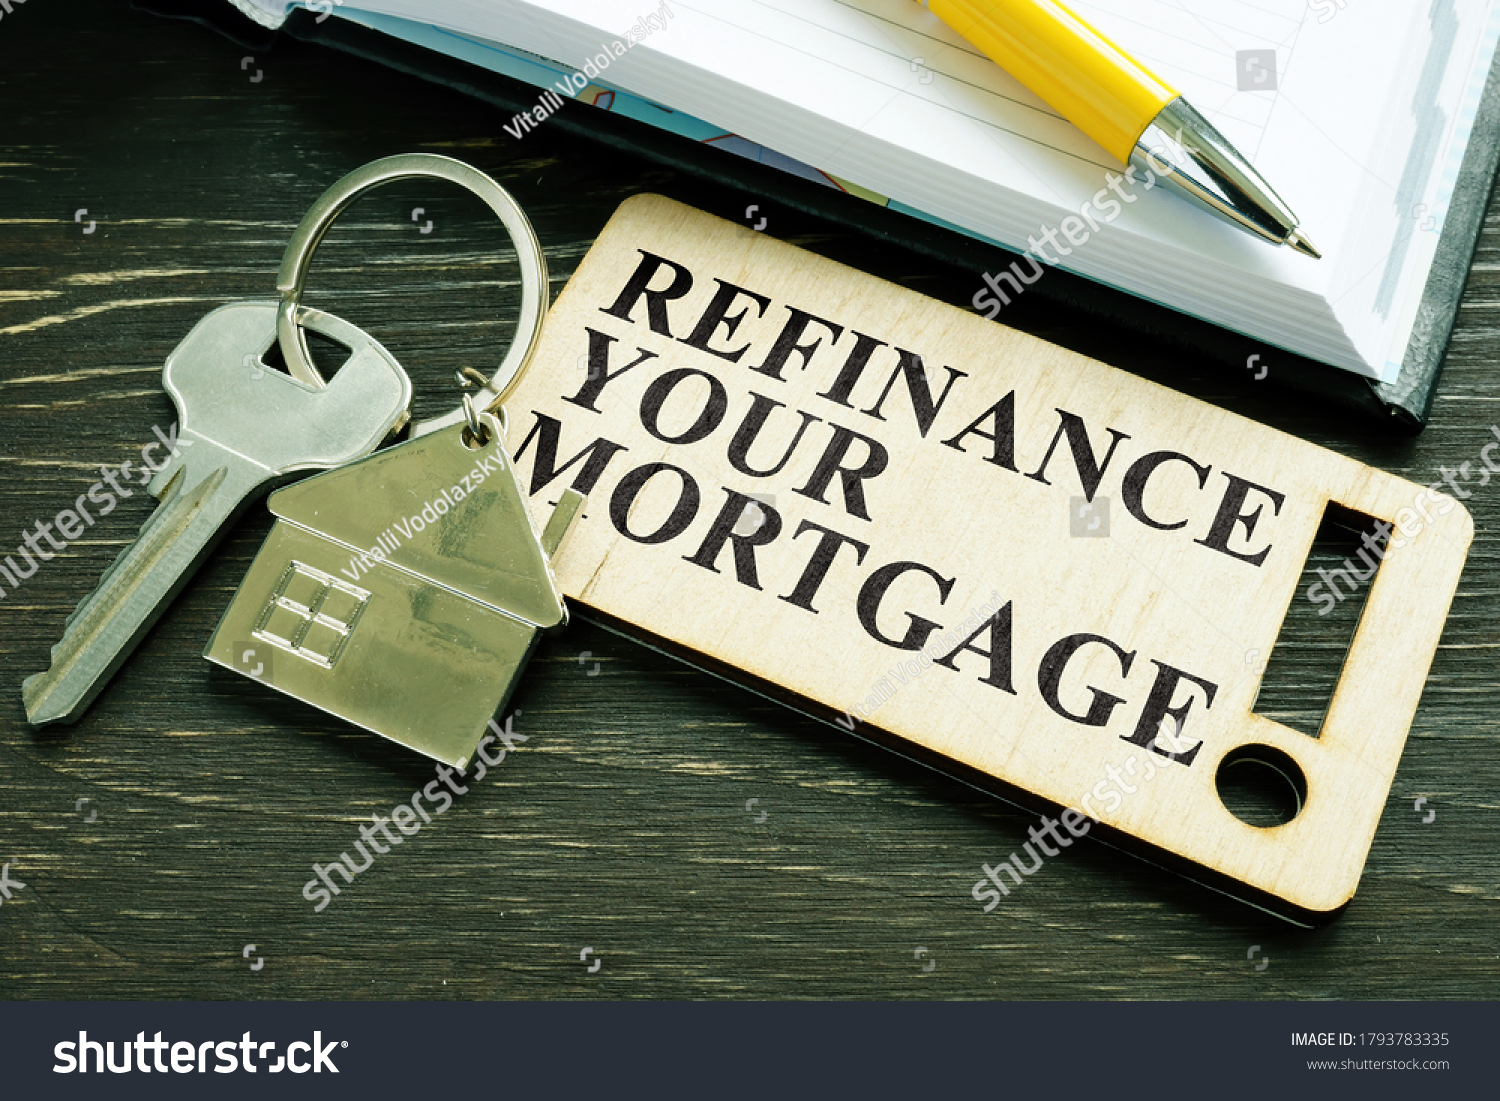 Refinance your mortgage phrase and key with small home. #1793783335